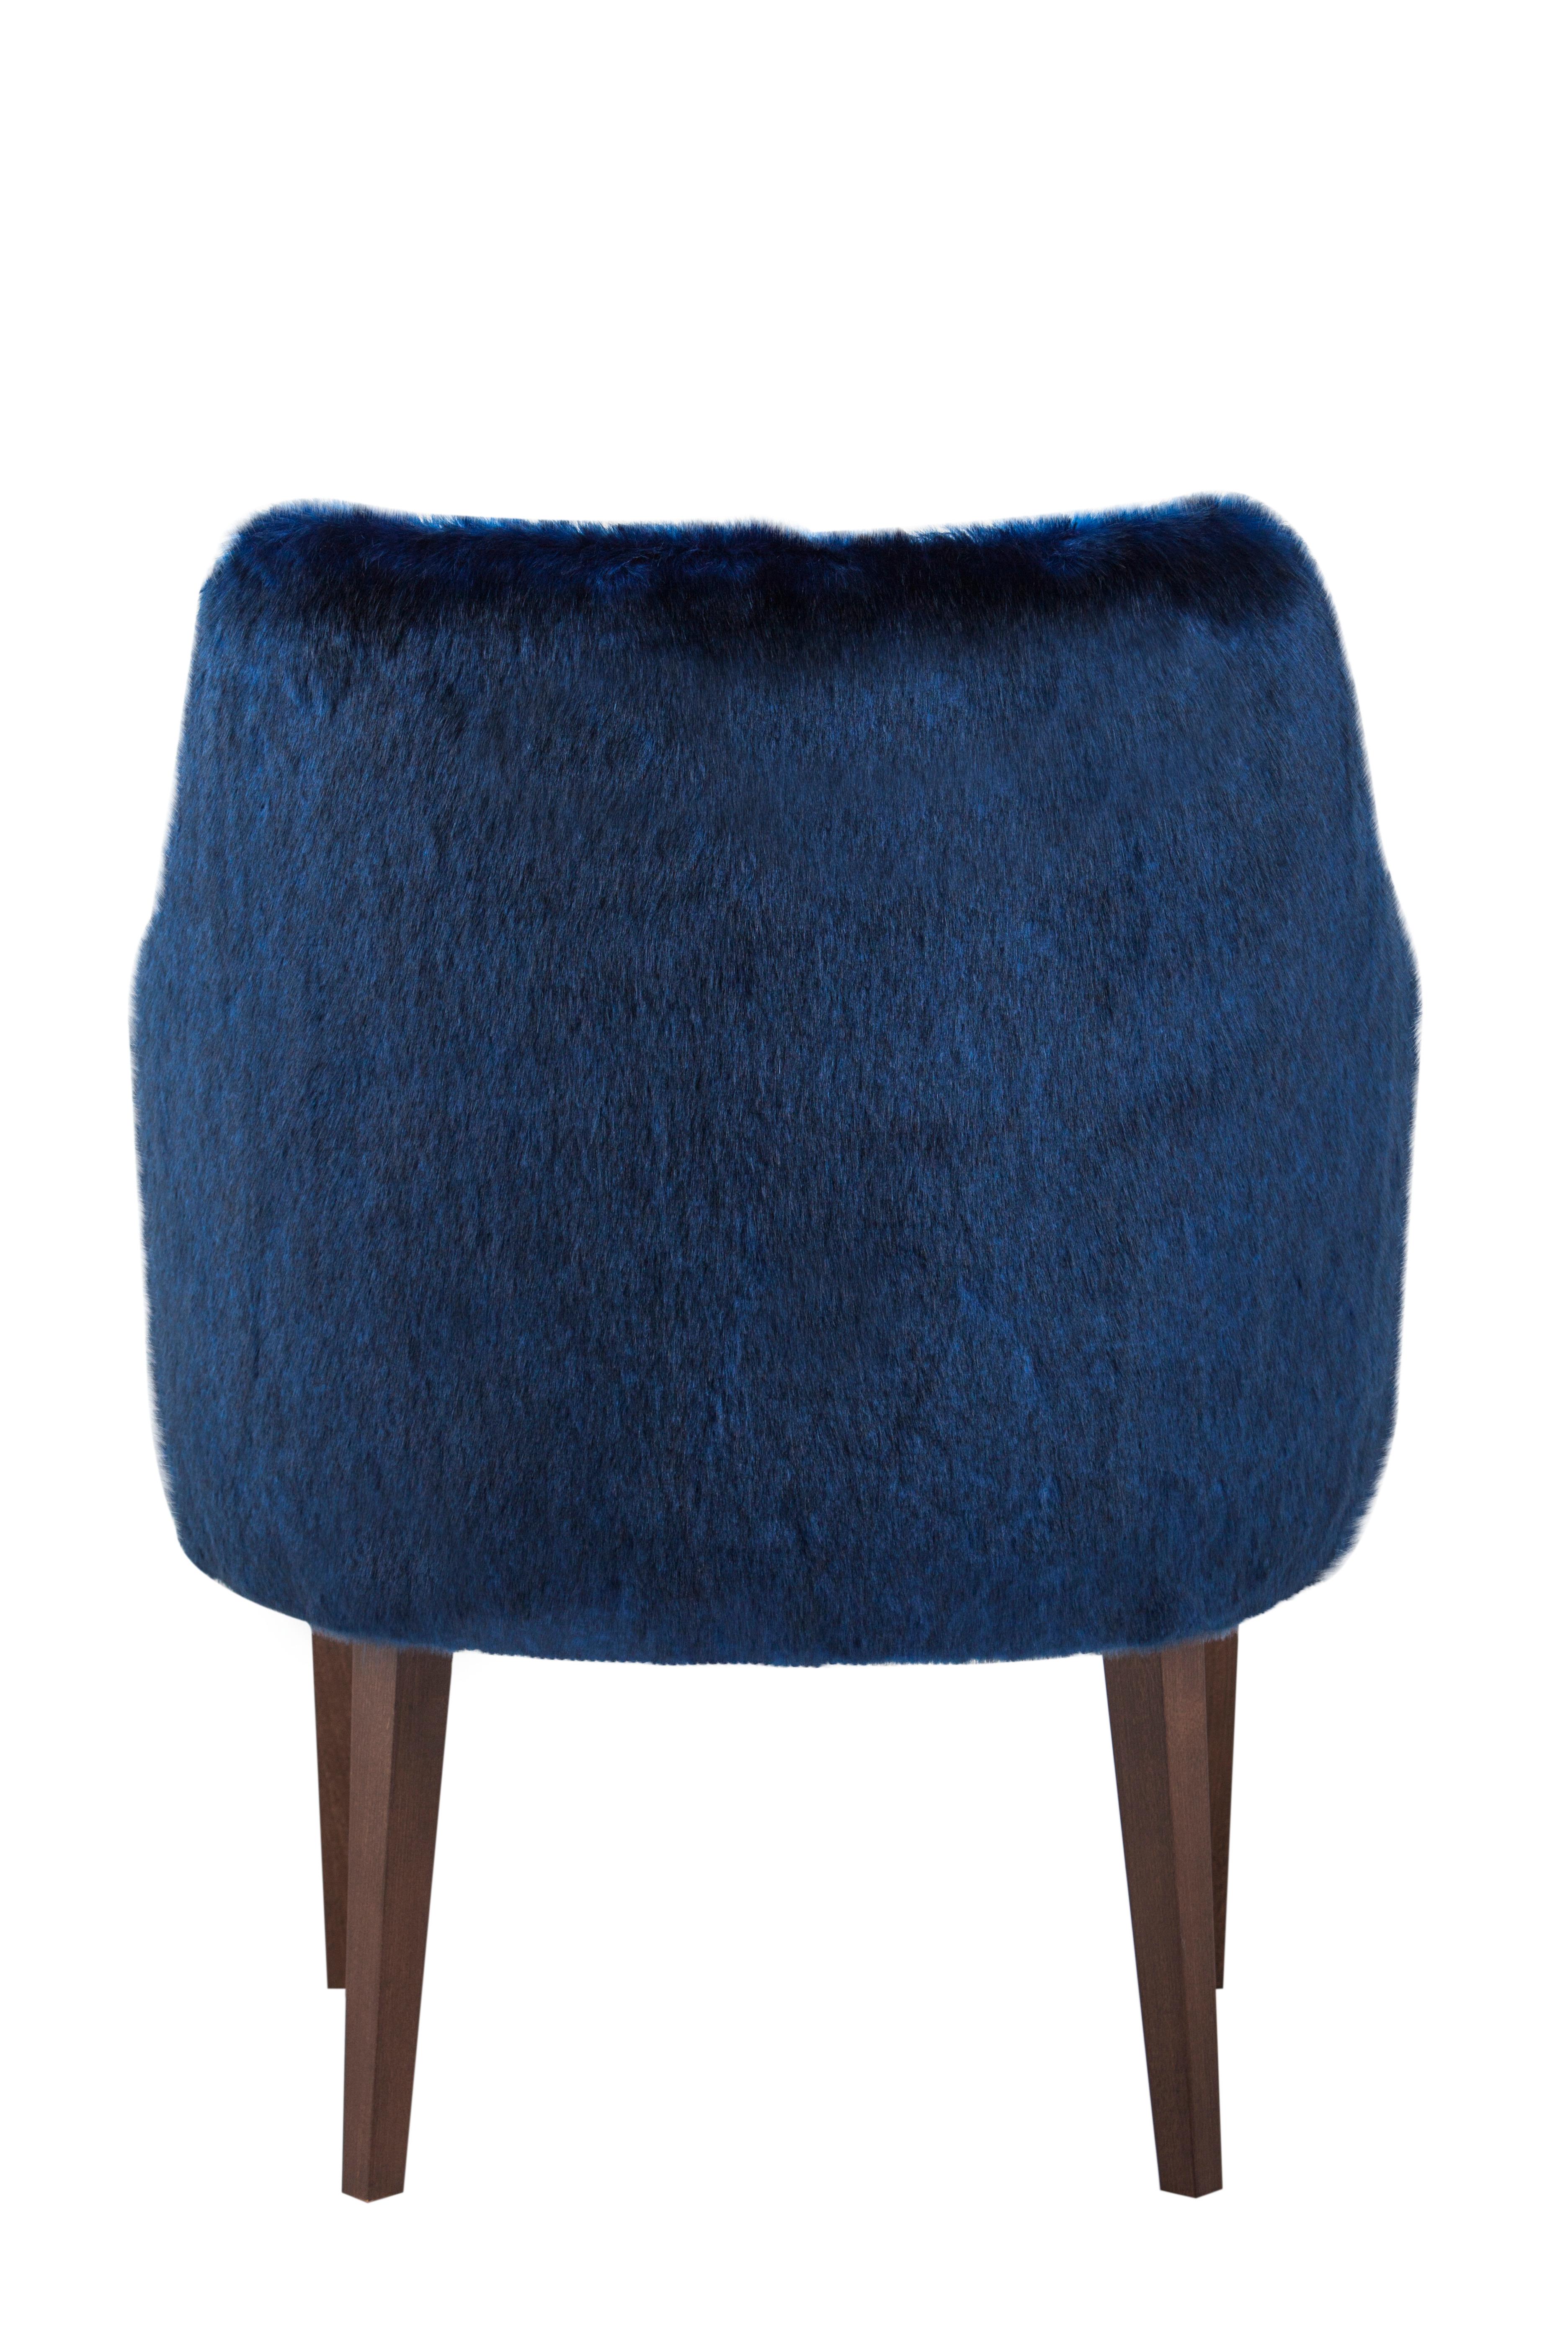 Portuguese Art Deco Margot Dining Chairs, Faux Fur Velvet, Handmade Portugal by Greenapple For Sale